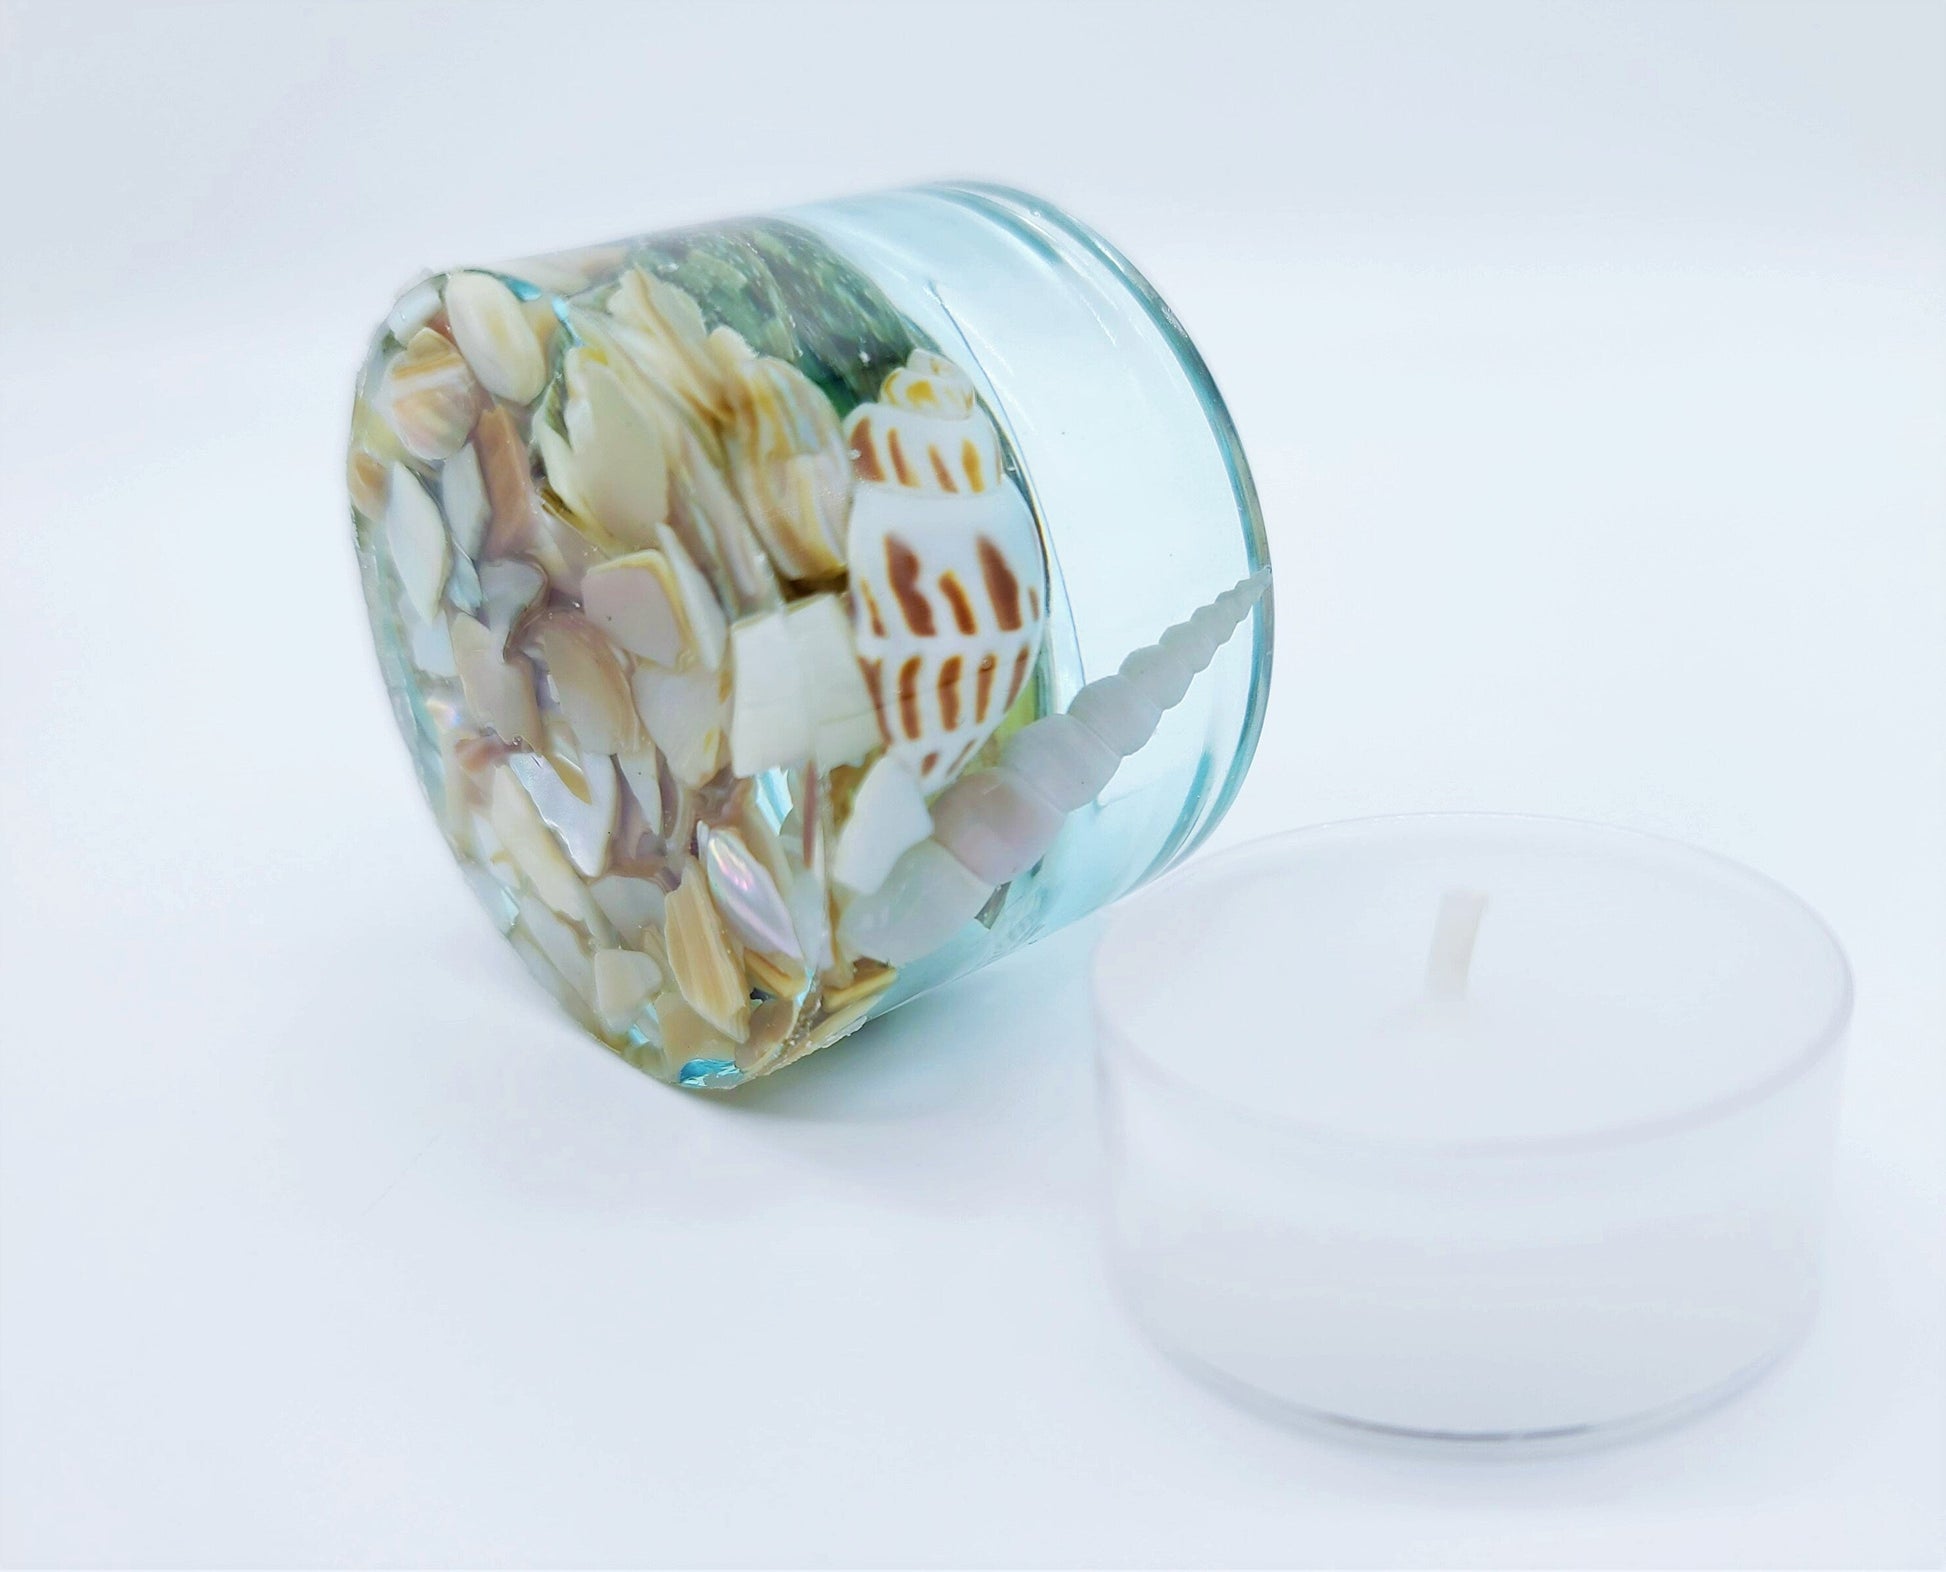 Beach Themed Round Candle Holder Made with Eco-Friendly Epoxy Resin and Seashells - Includes Choice of Real SCENTED Tealight or LED Tealight